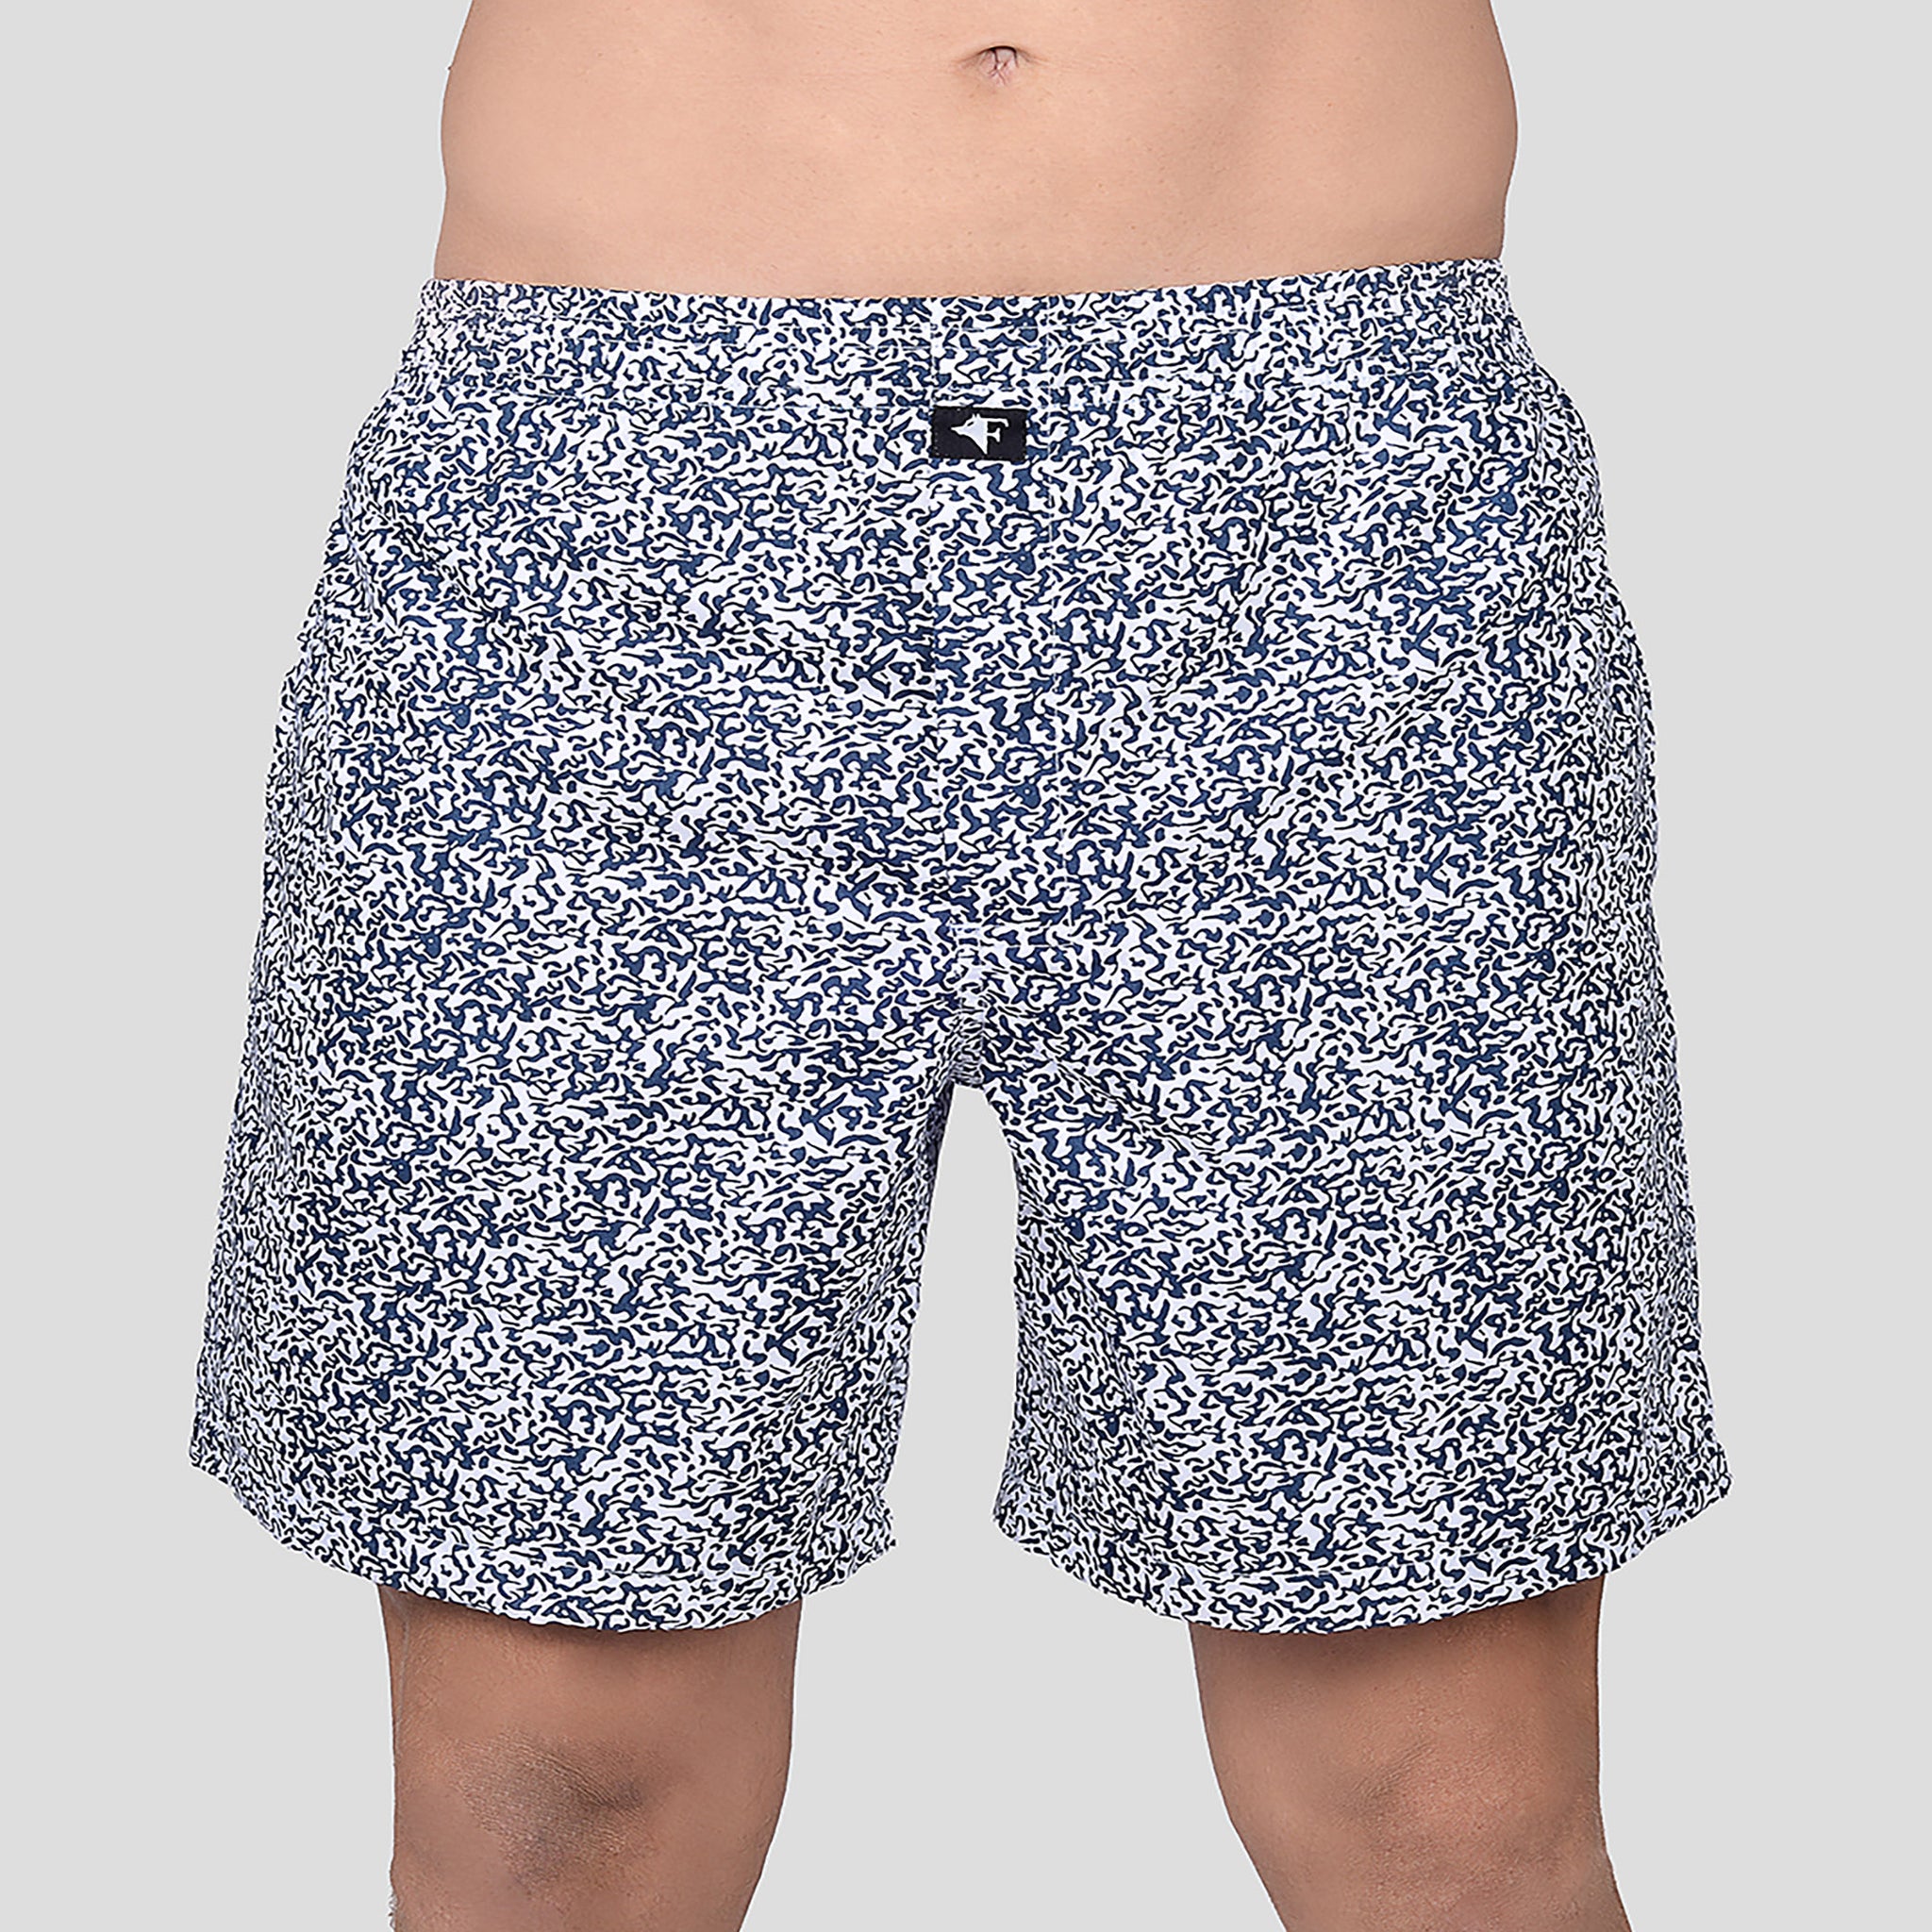 BOKSA Men's Printed Cotton Boxer Shorts with Side Pockets - White Abstract